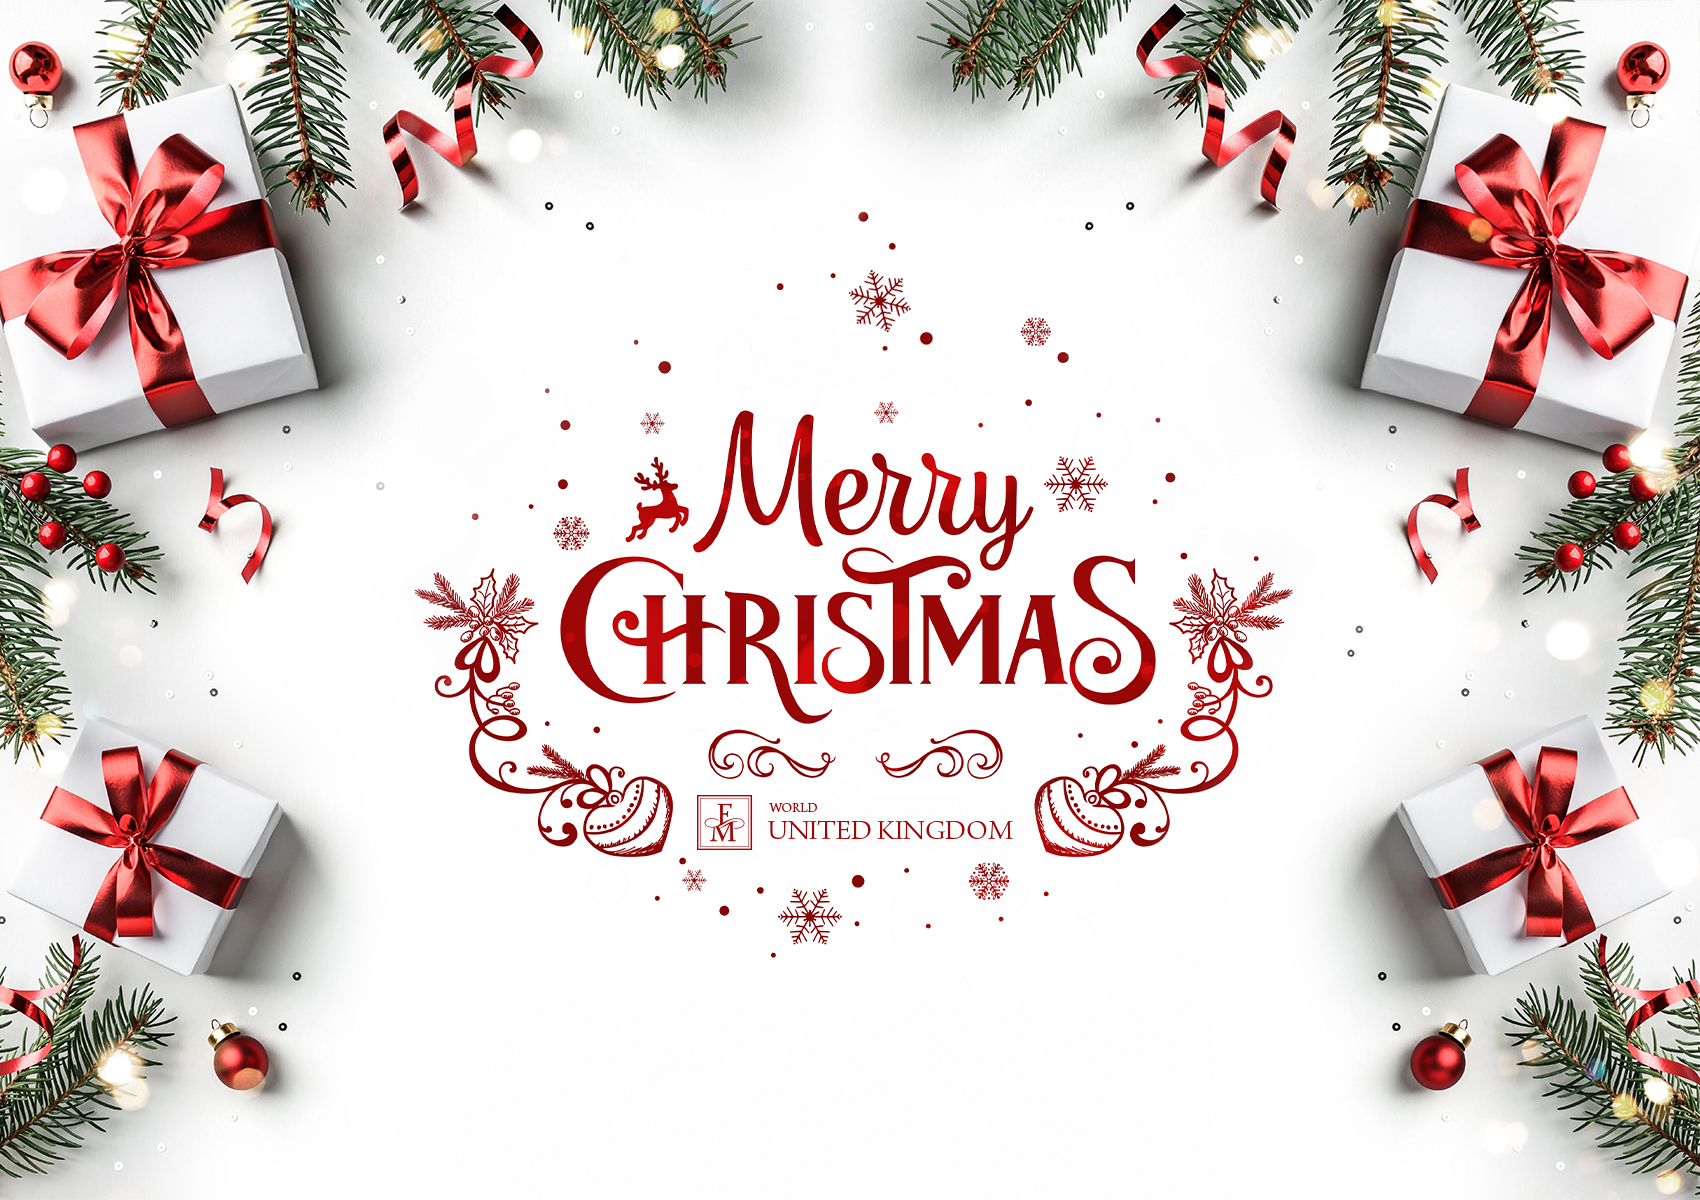 Merry Christmas Fm World Uk Official Website Fm World Operates Within The Fmcg Industry Under The Multi Level Marketing Business Model